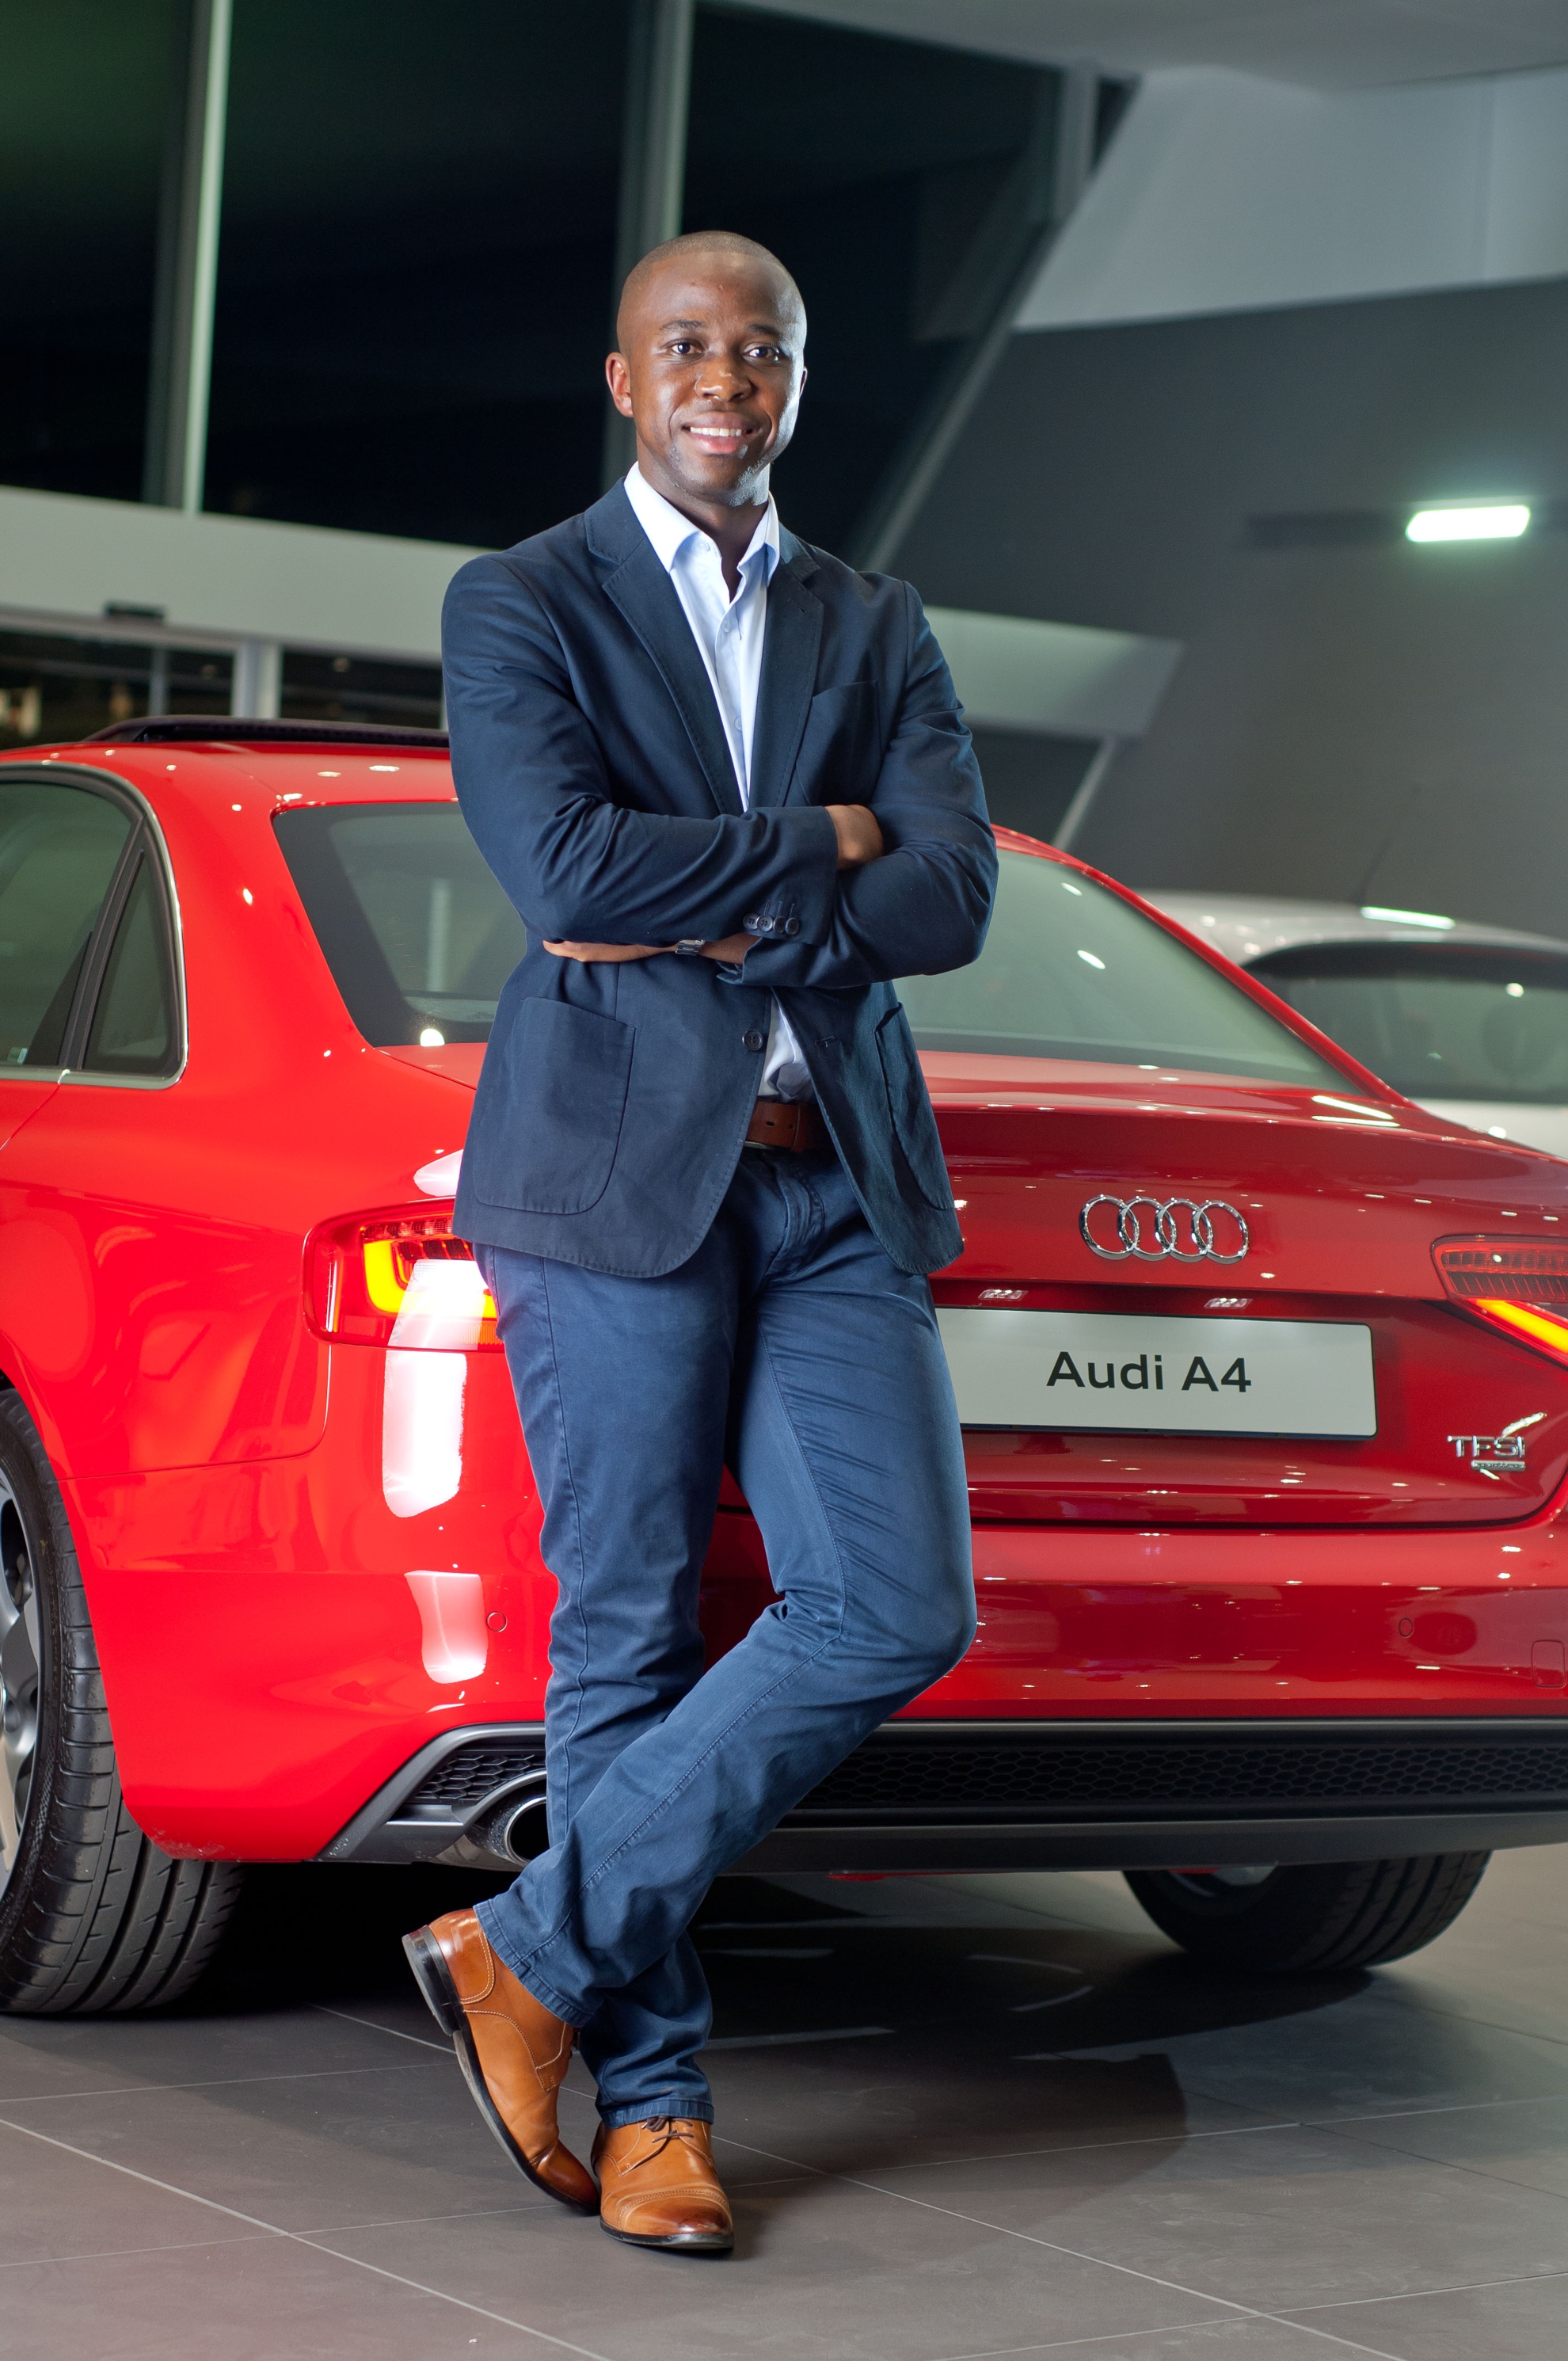 Audi South Africa partners with the SA Innovation Summit